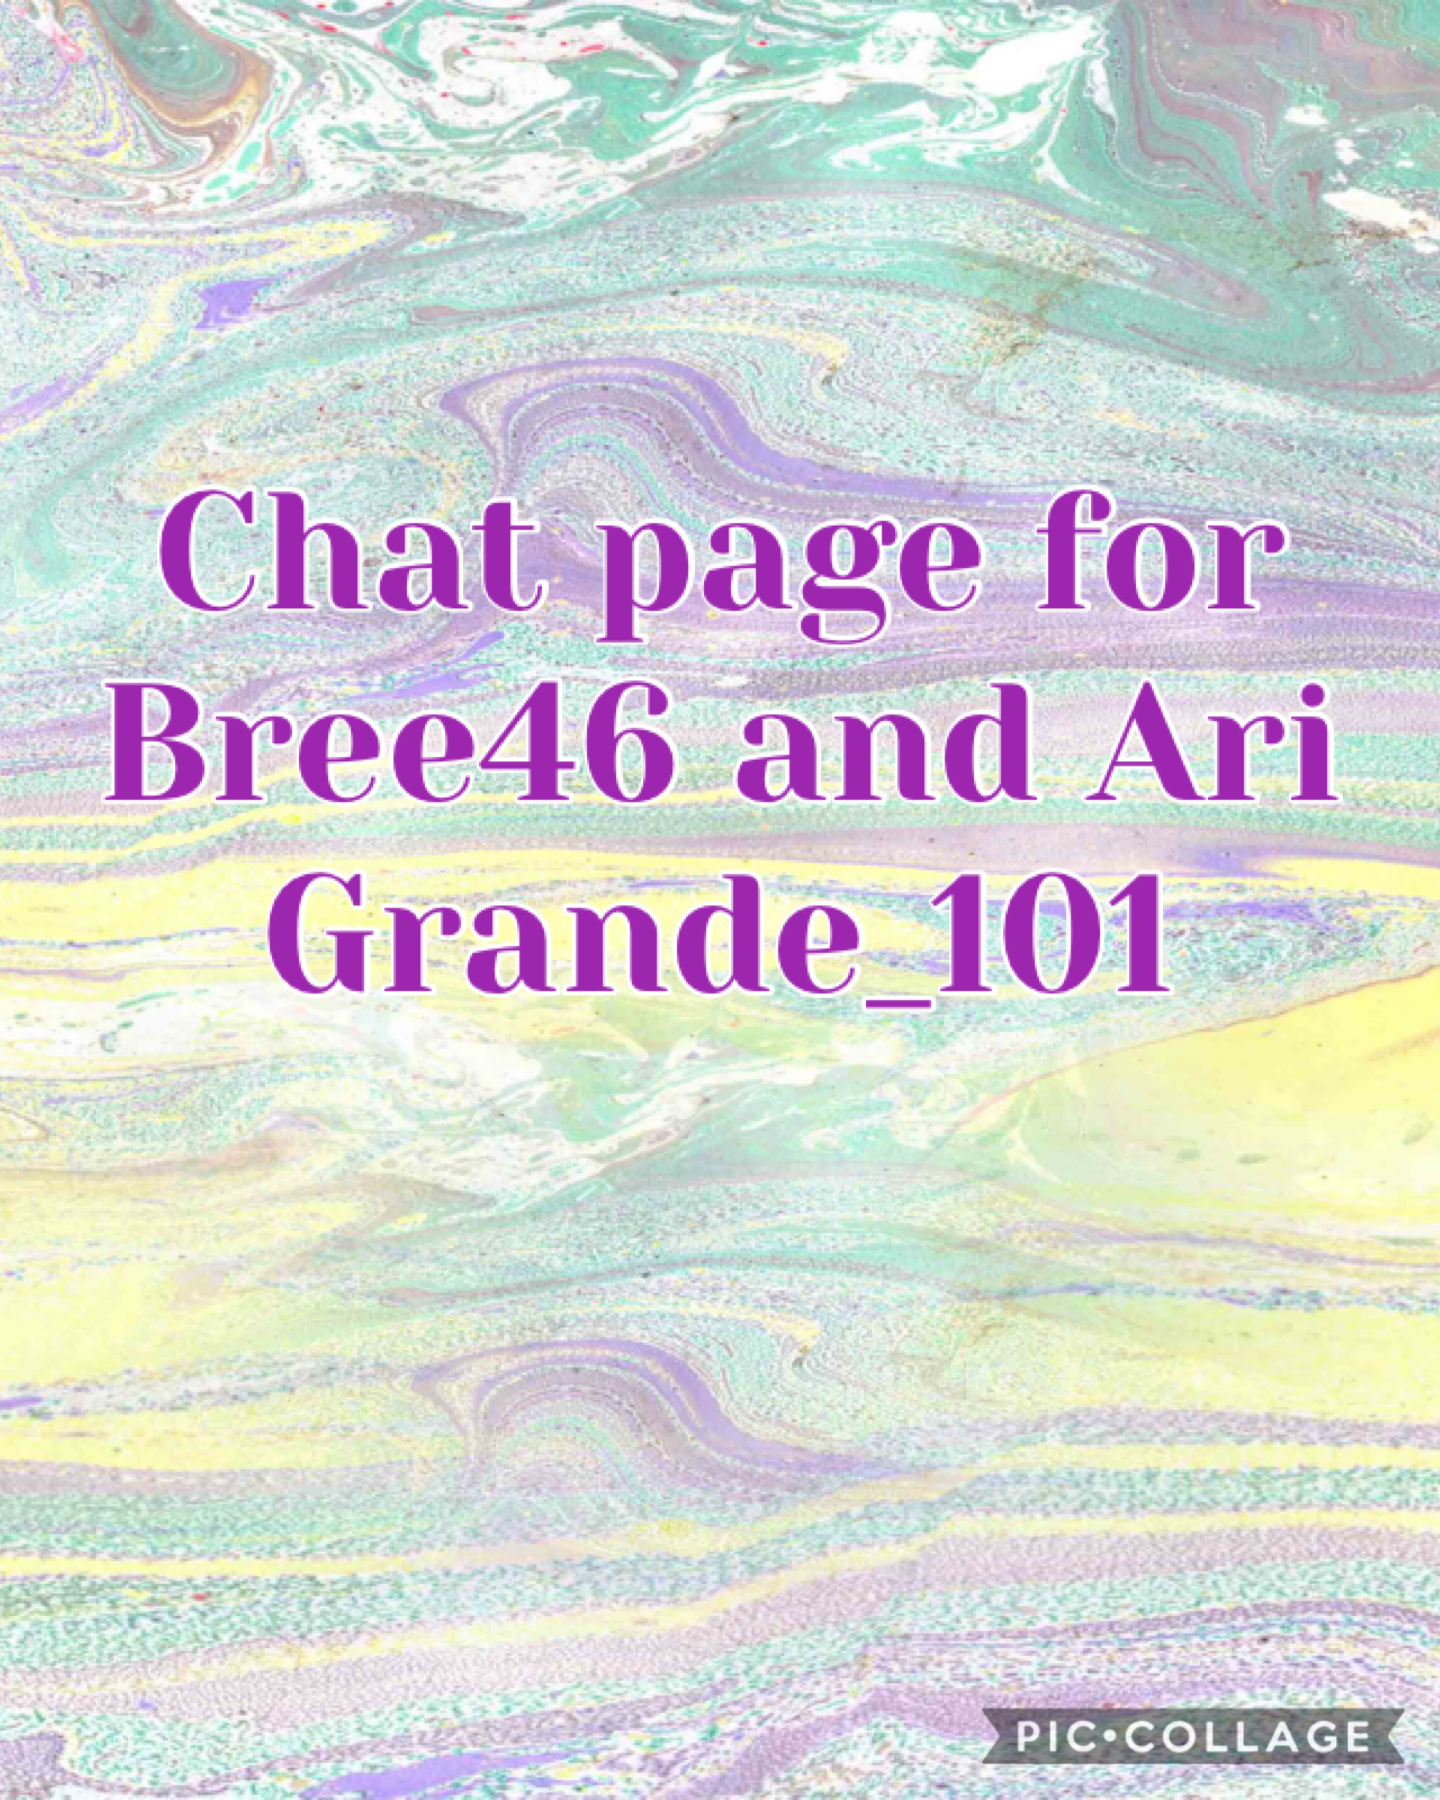 Chat page with Arigrande101 